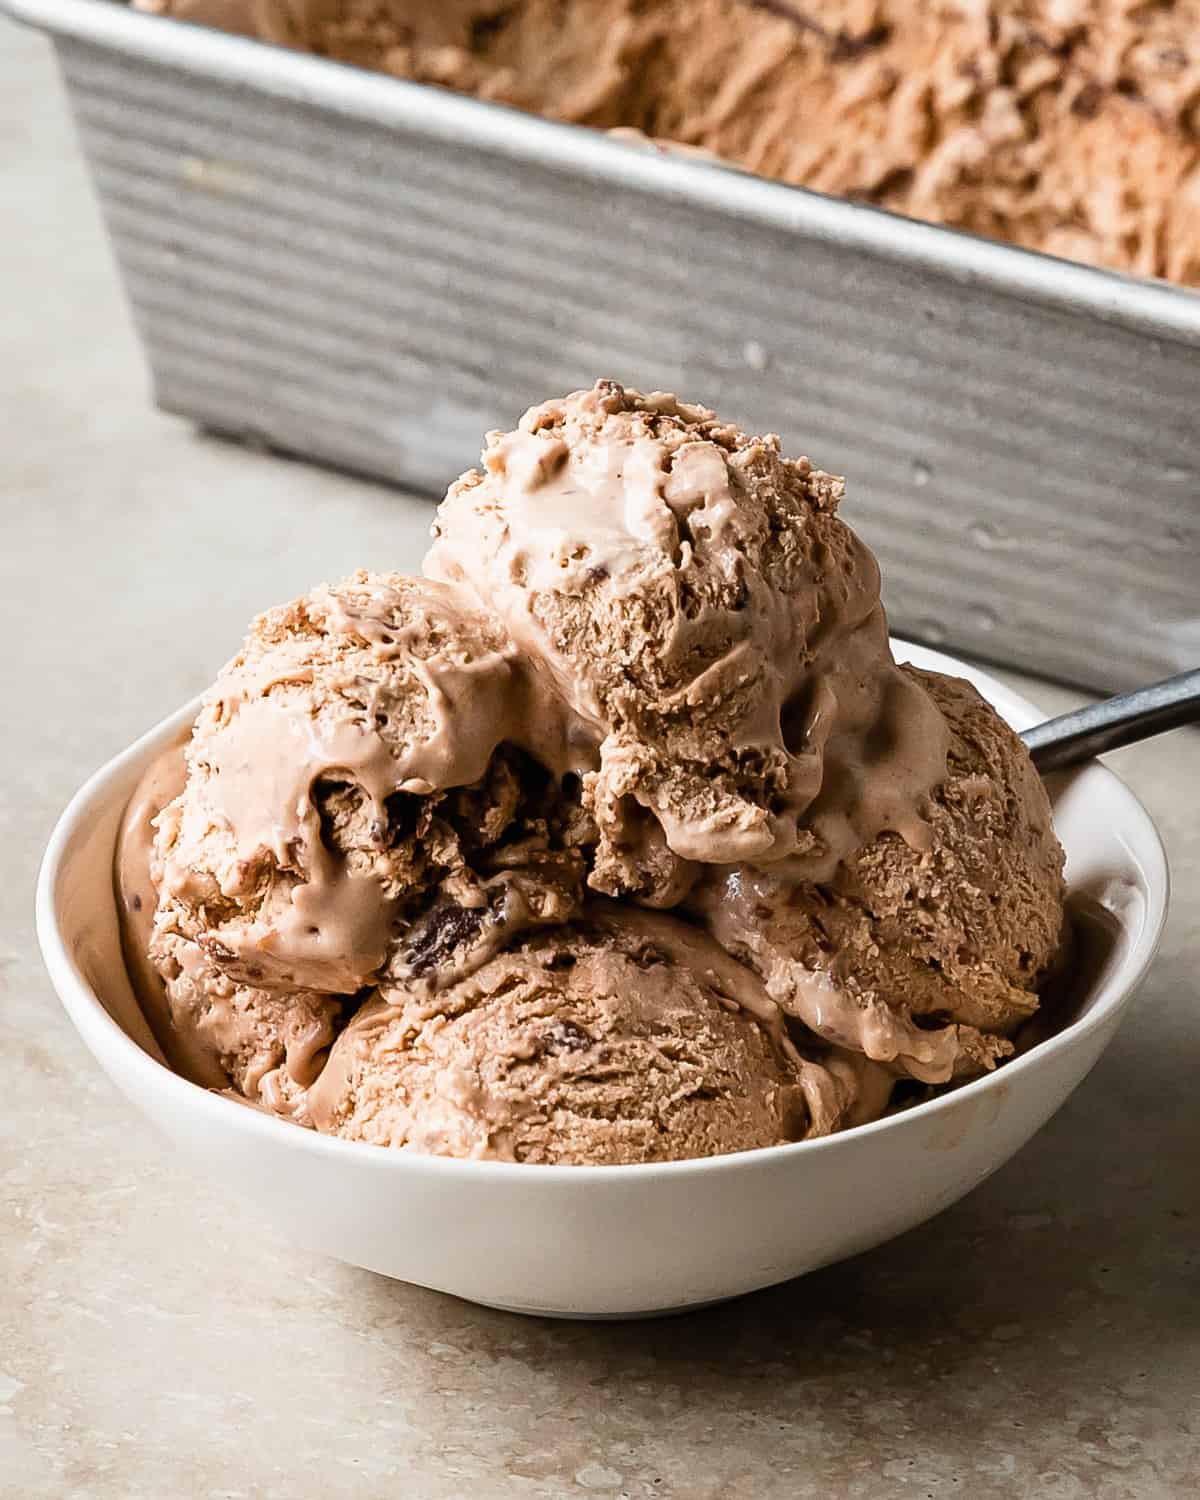  Nutella ice cream is an rich, sweet and creamy, chocolate-y ice cream with Nutella swirled throughout. Learn how to make Nutella ice cream in a few easy steps with with just 5 simple ingredients. This recipe makes the perfect chocolate and hazelnut filled sweet treat.